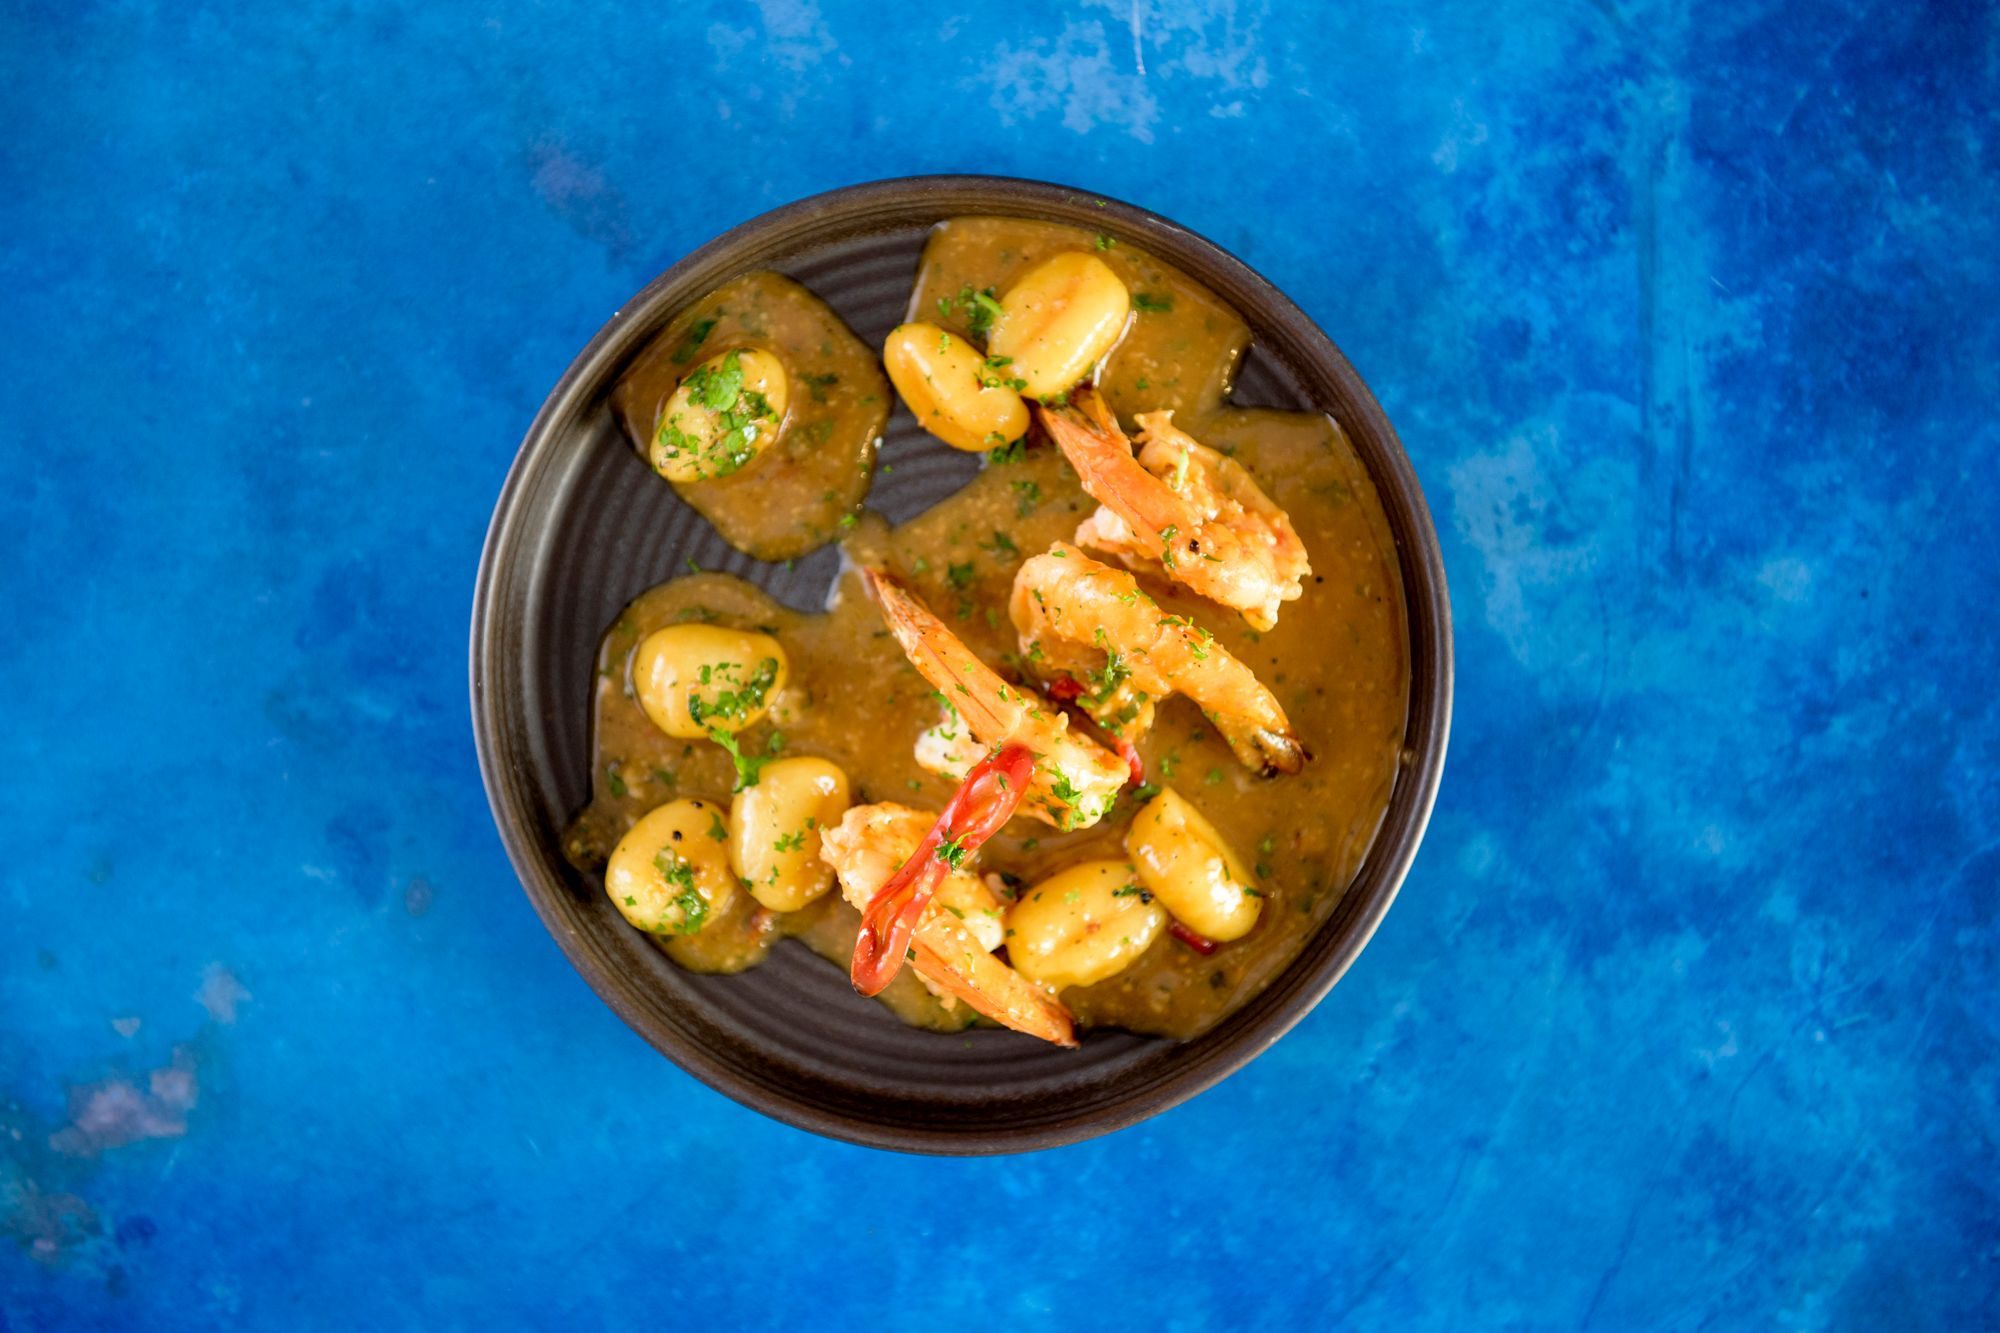 Gardies Saganaki dish - king prawns cooked in bisque, served on blue plate and blue table